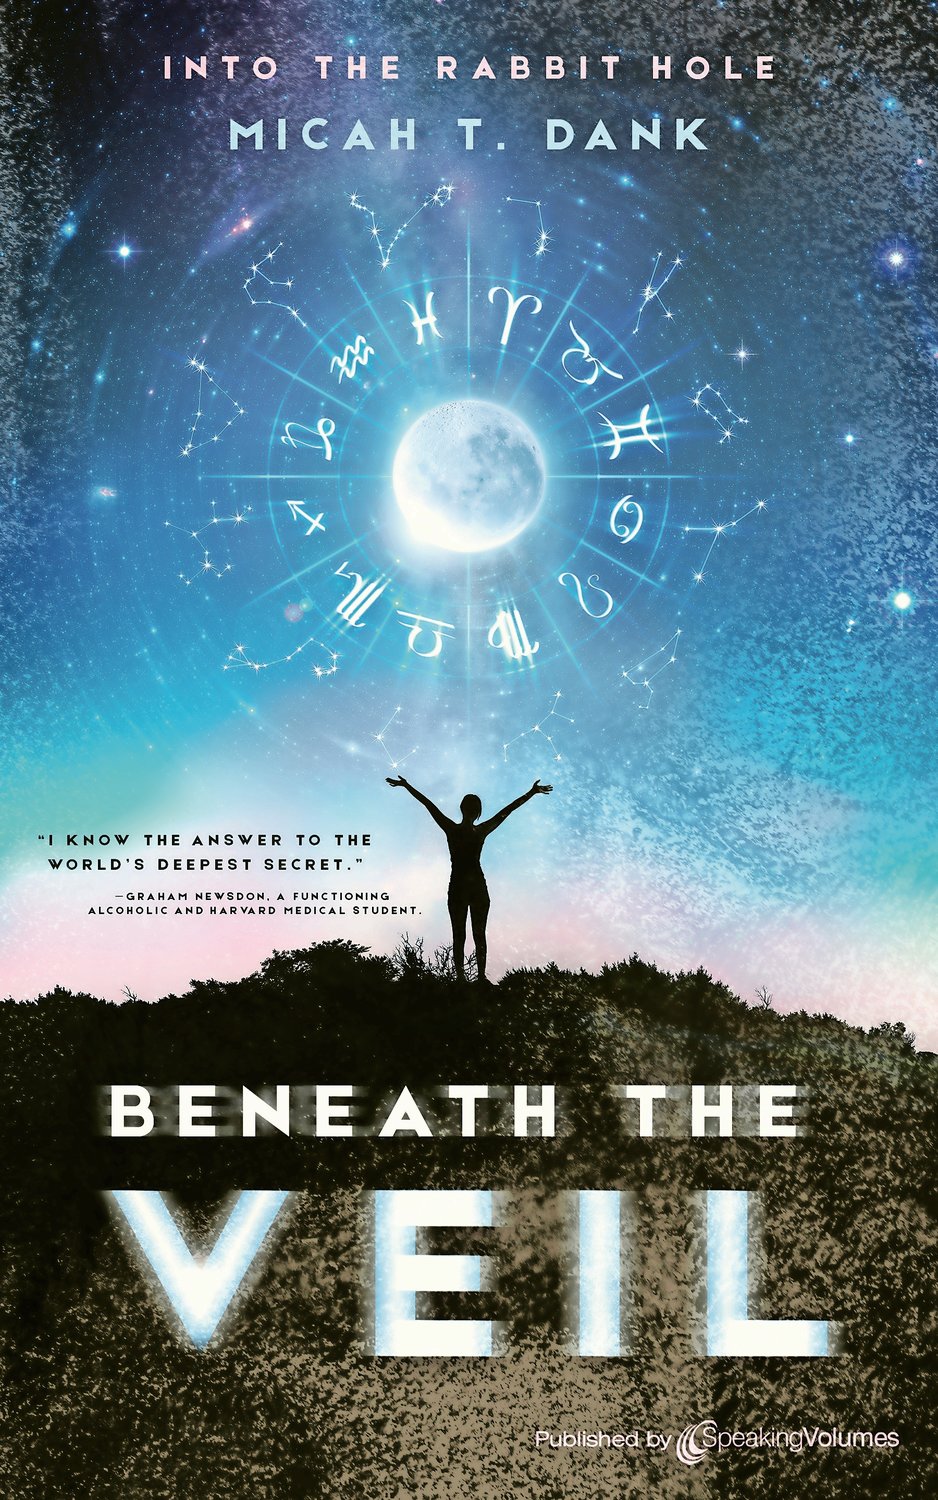 Rockville Centre native Micah Dank’s debut novel, “Beneath the Veil,” was released on June 30. It is the first of six books in his “Into the Rabbit Hole” series.